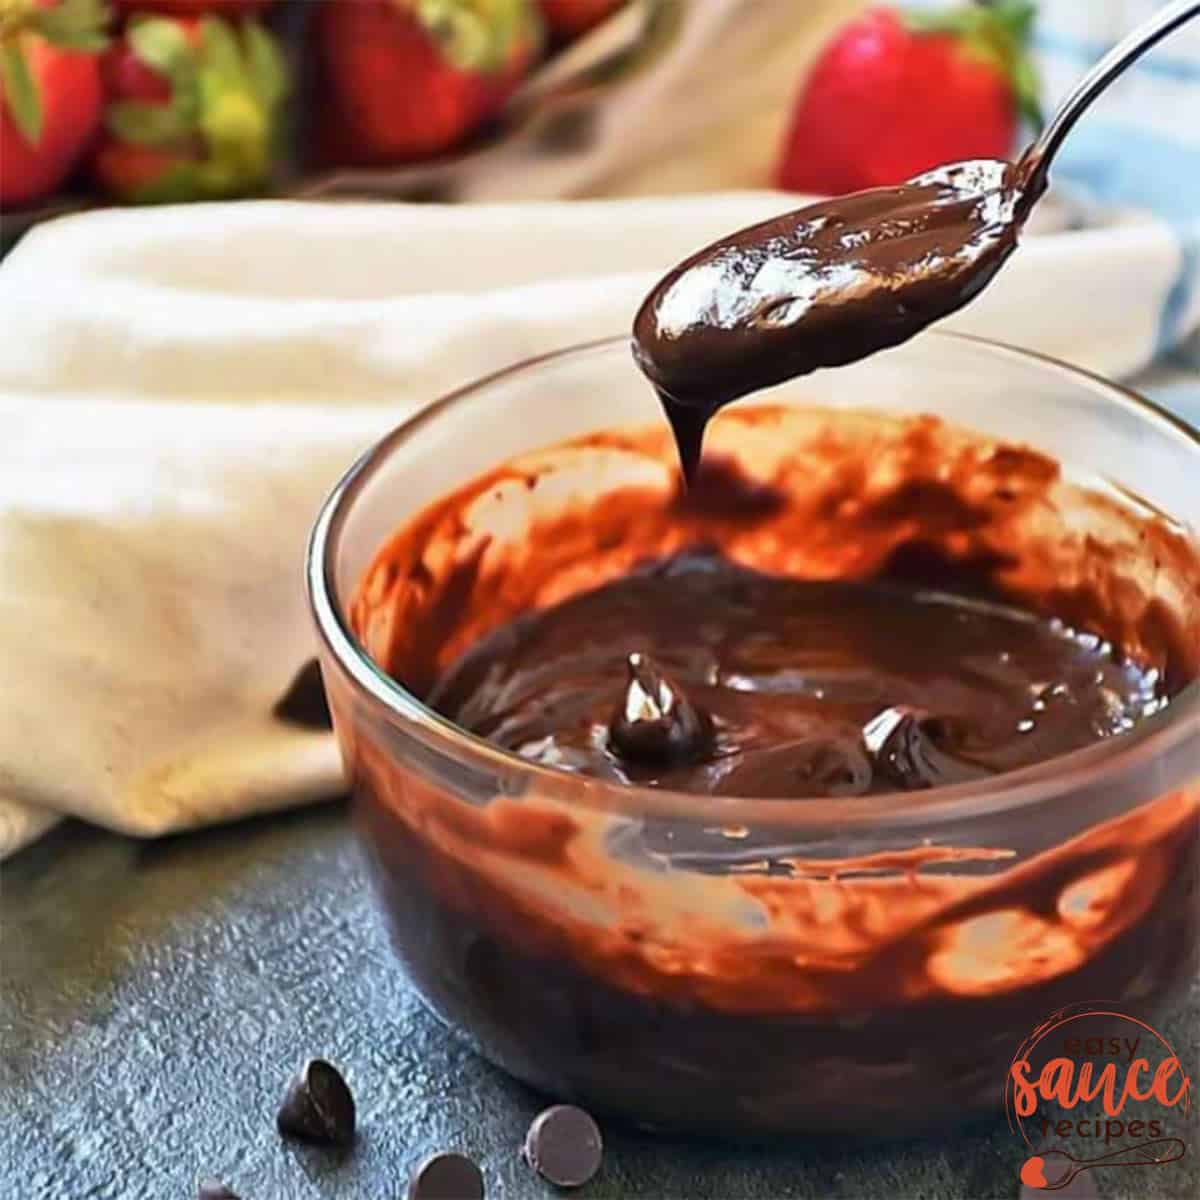 a bowl of chocolate ganache and a spoon drizzling some ganache